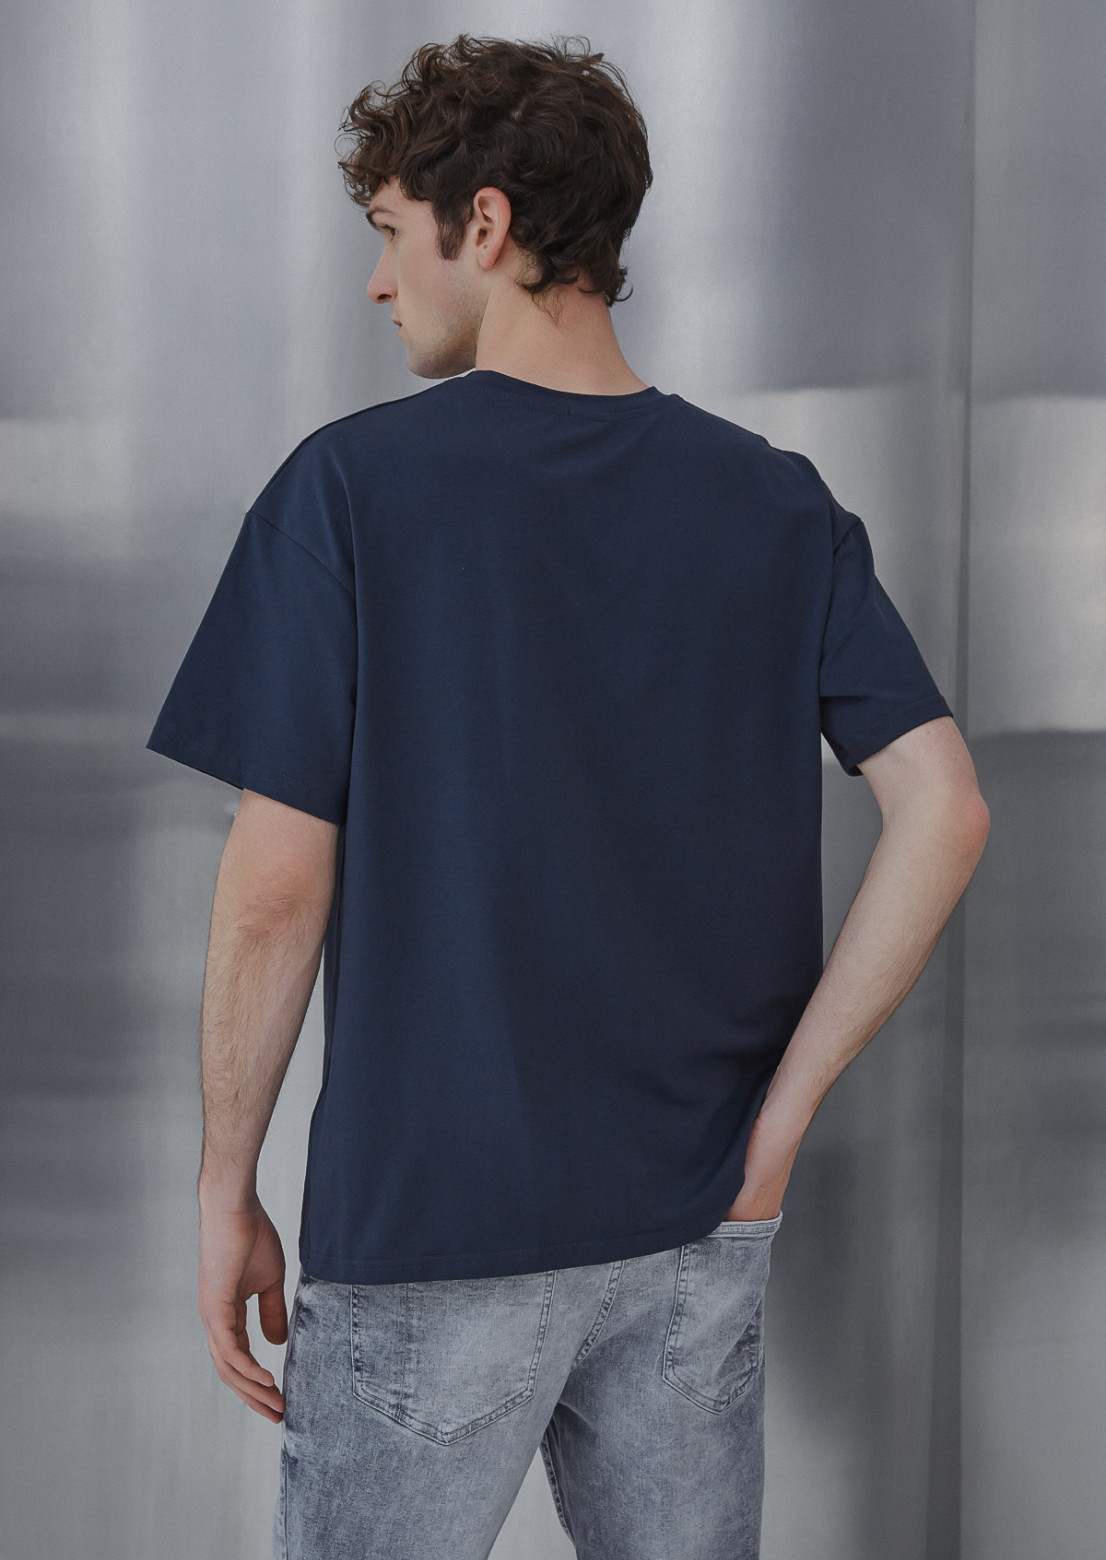 Anthracite grey oversize unisex t-shirt with foil detail